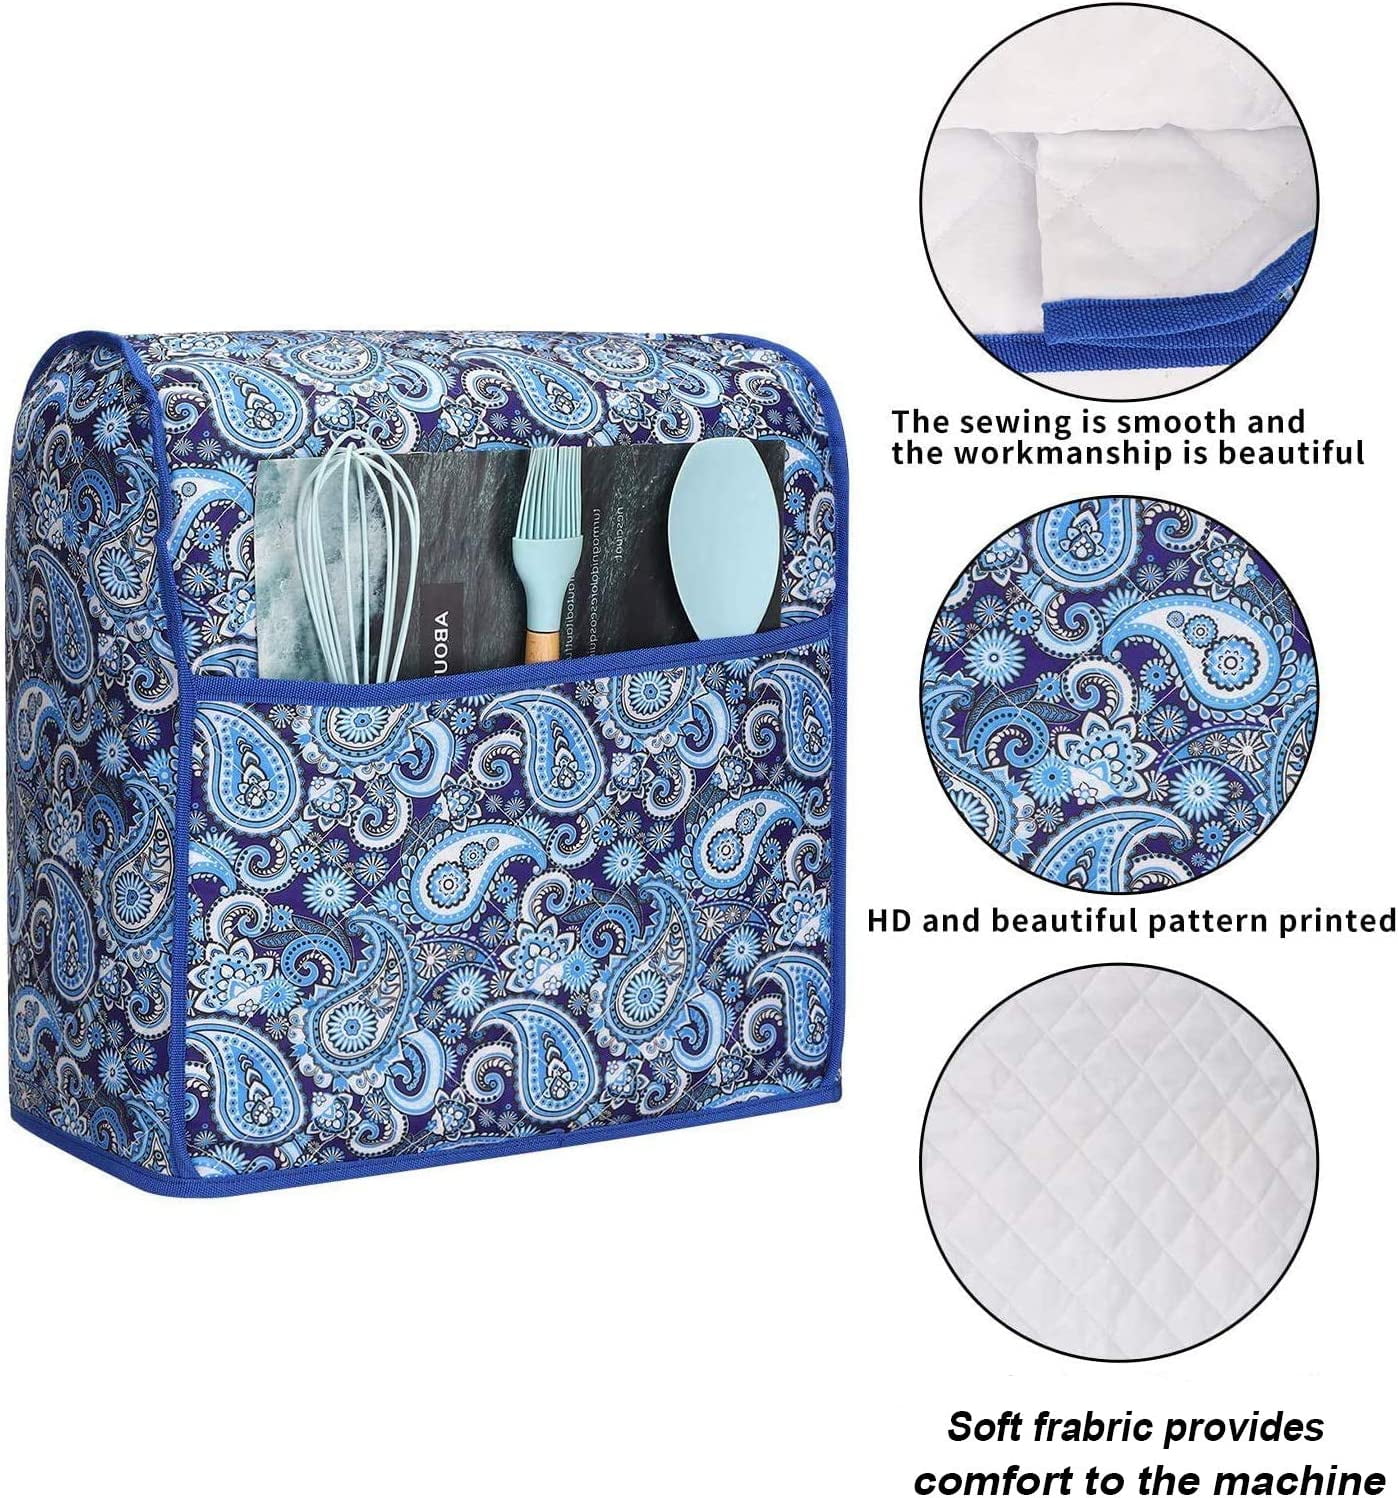 French Sleep Deprivation Study: Not so De-Vinyl  Kitchen aid mixer cover  pattern, Mixer cover, Sewing machine cover